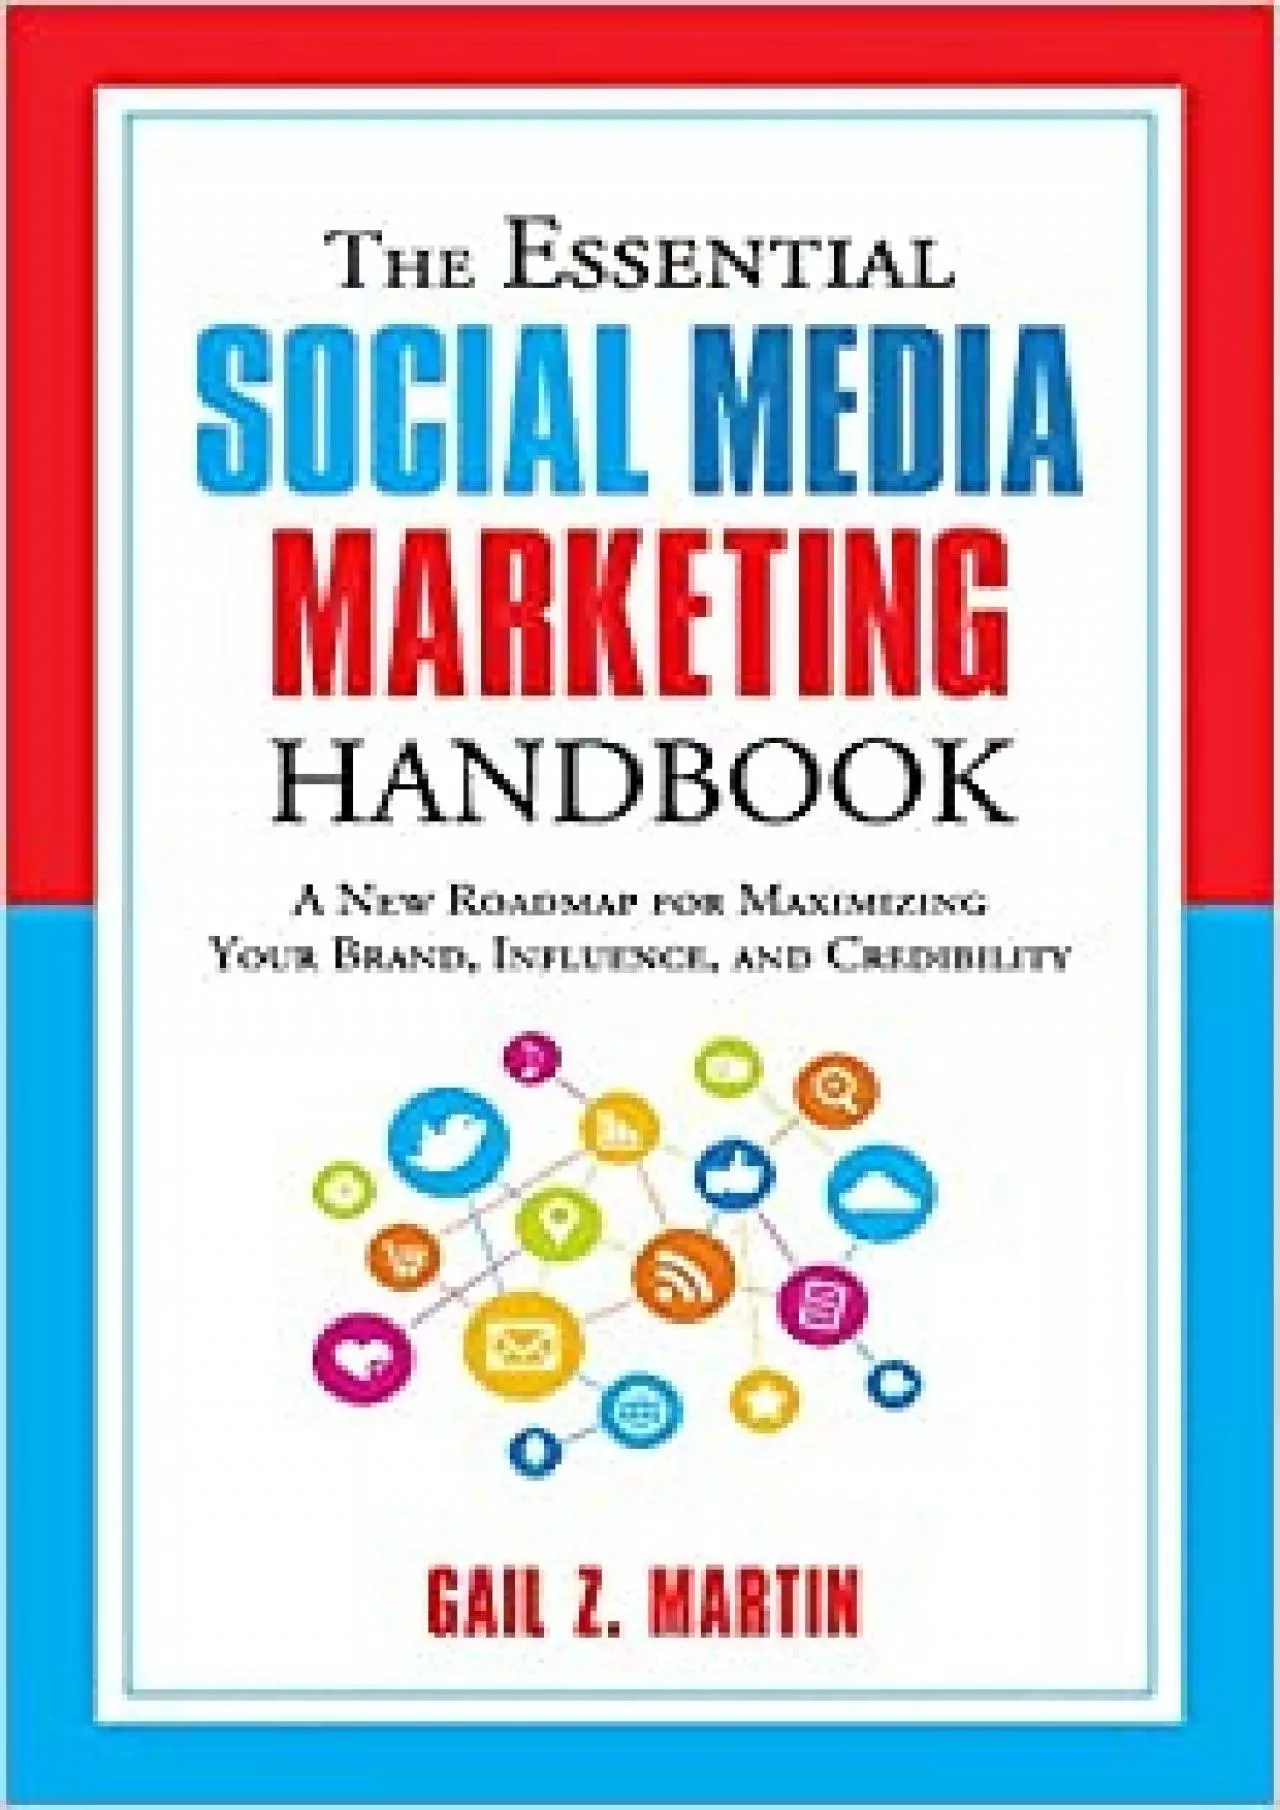 The Essential Social Media Marketing Handbook A New Roadmap for Maximizing Your Brand